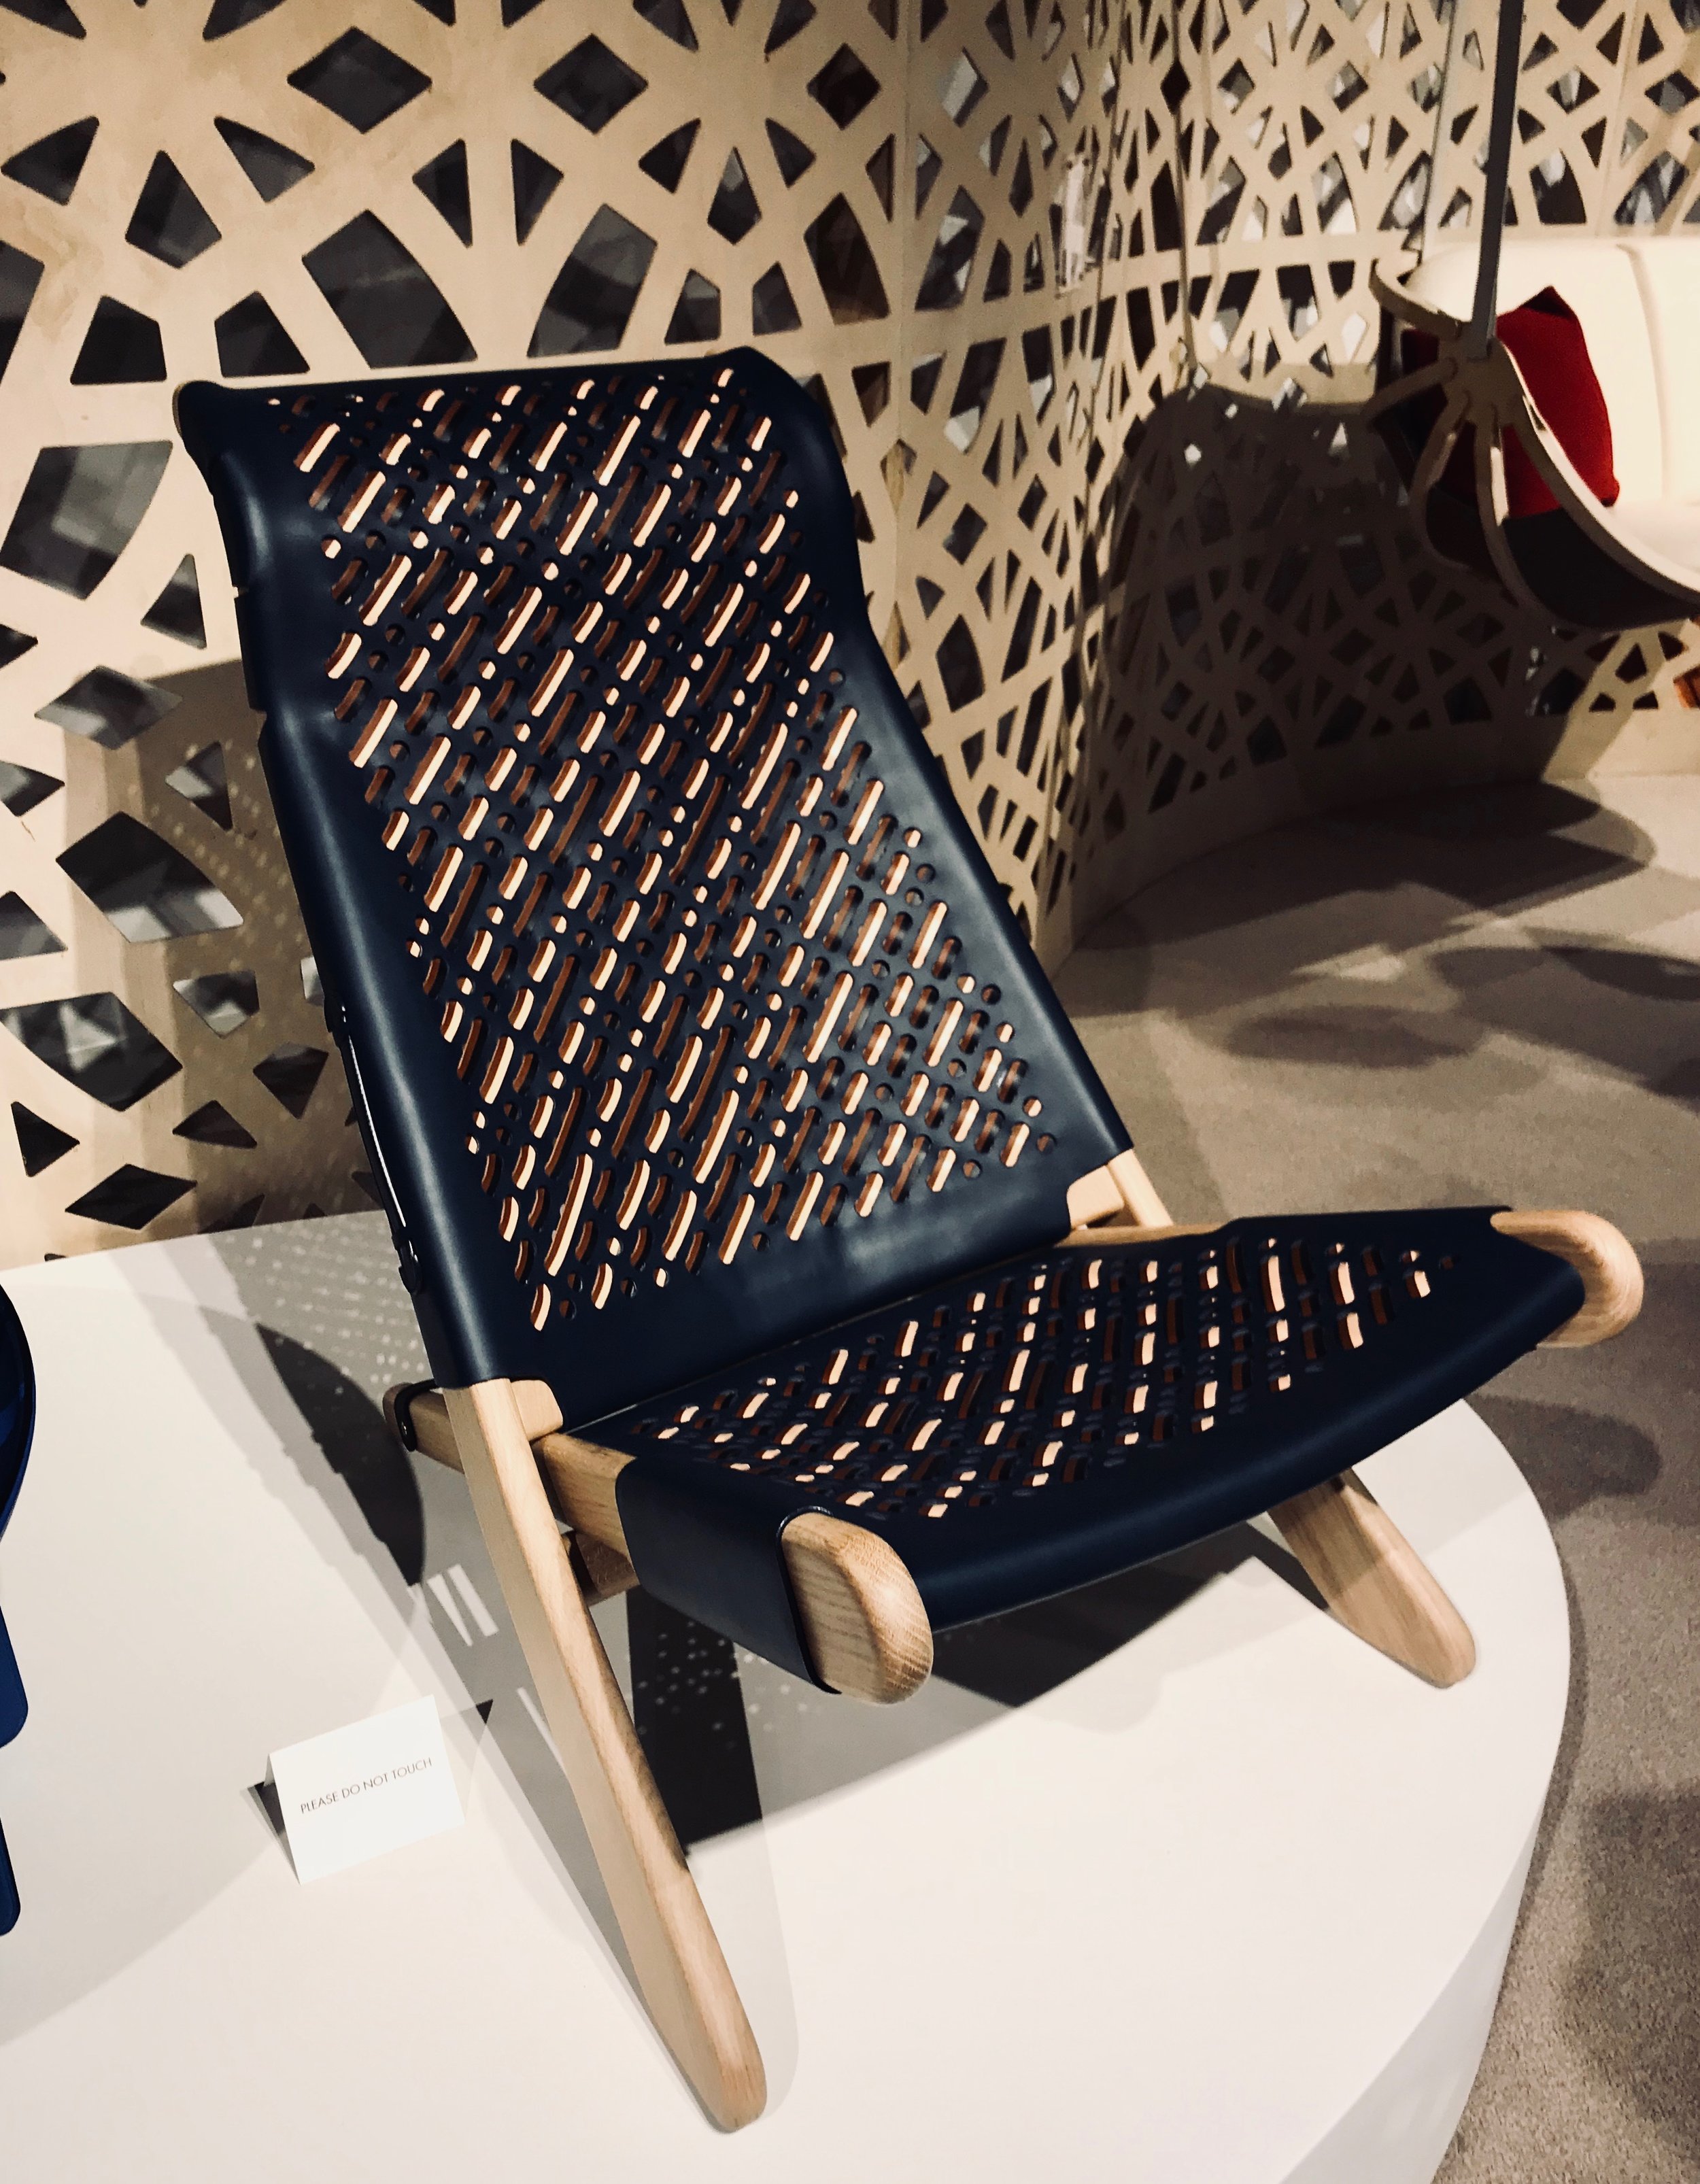 Patricia Urquiola's Swing Chair for Louis Vuitton Objets Nomades